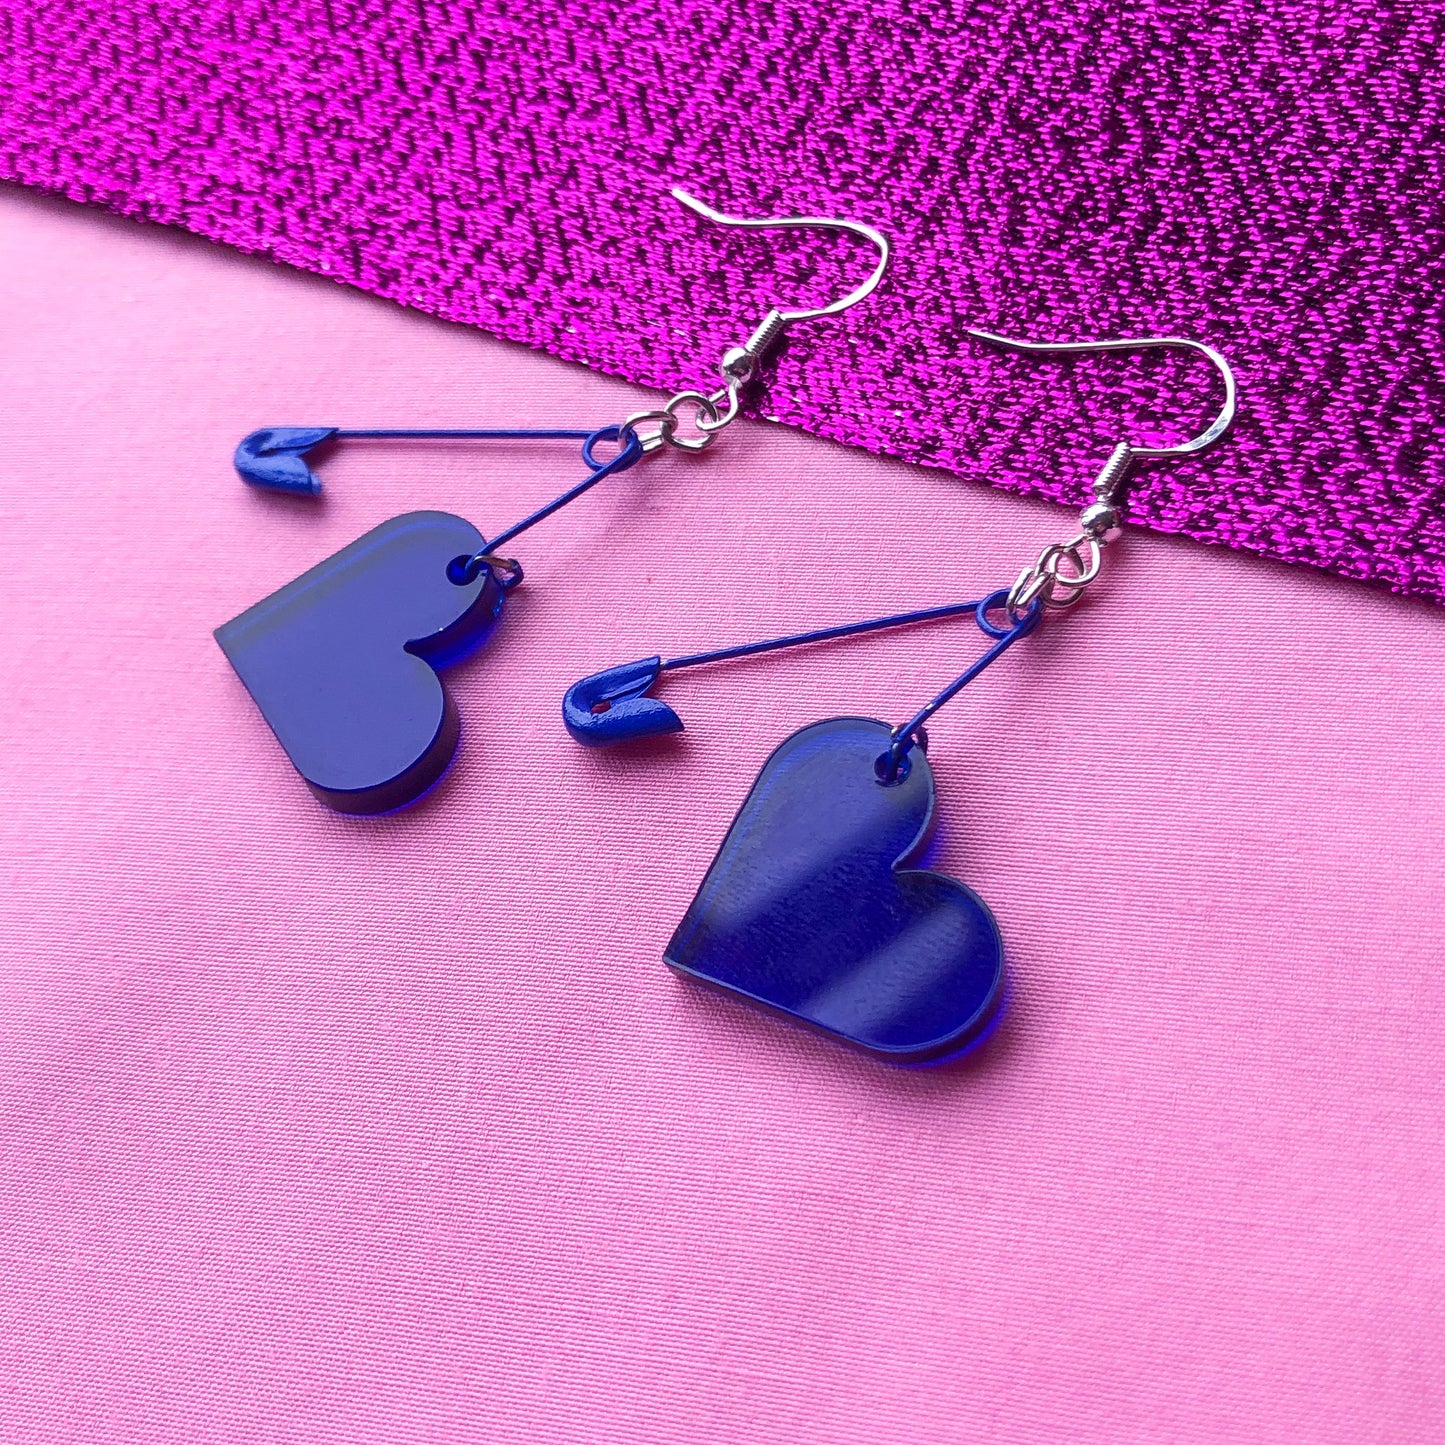 Blue safety pin and acrylic heart earrings